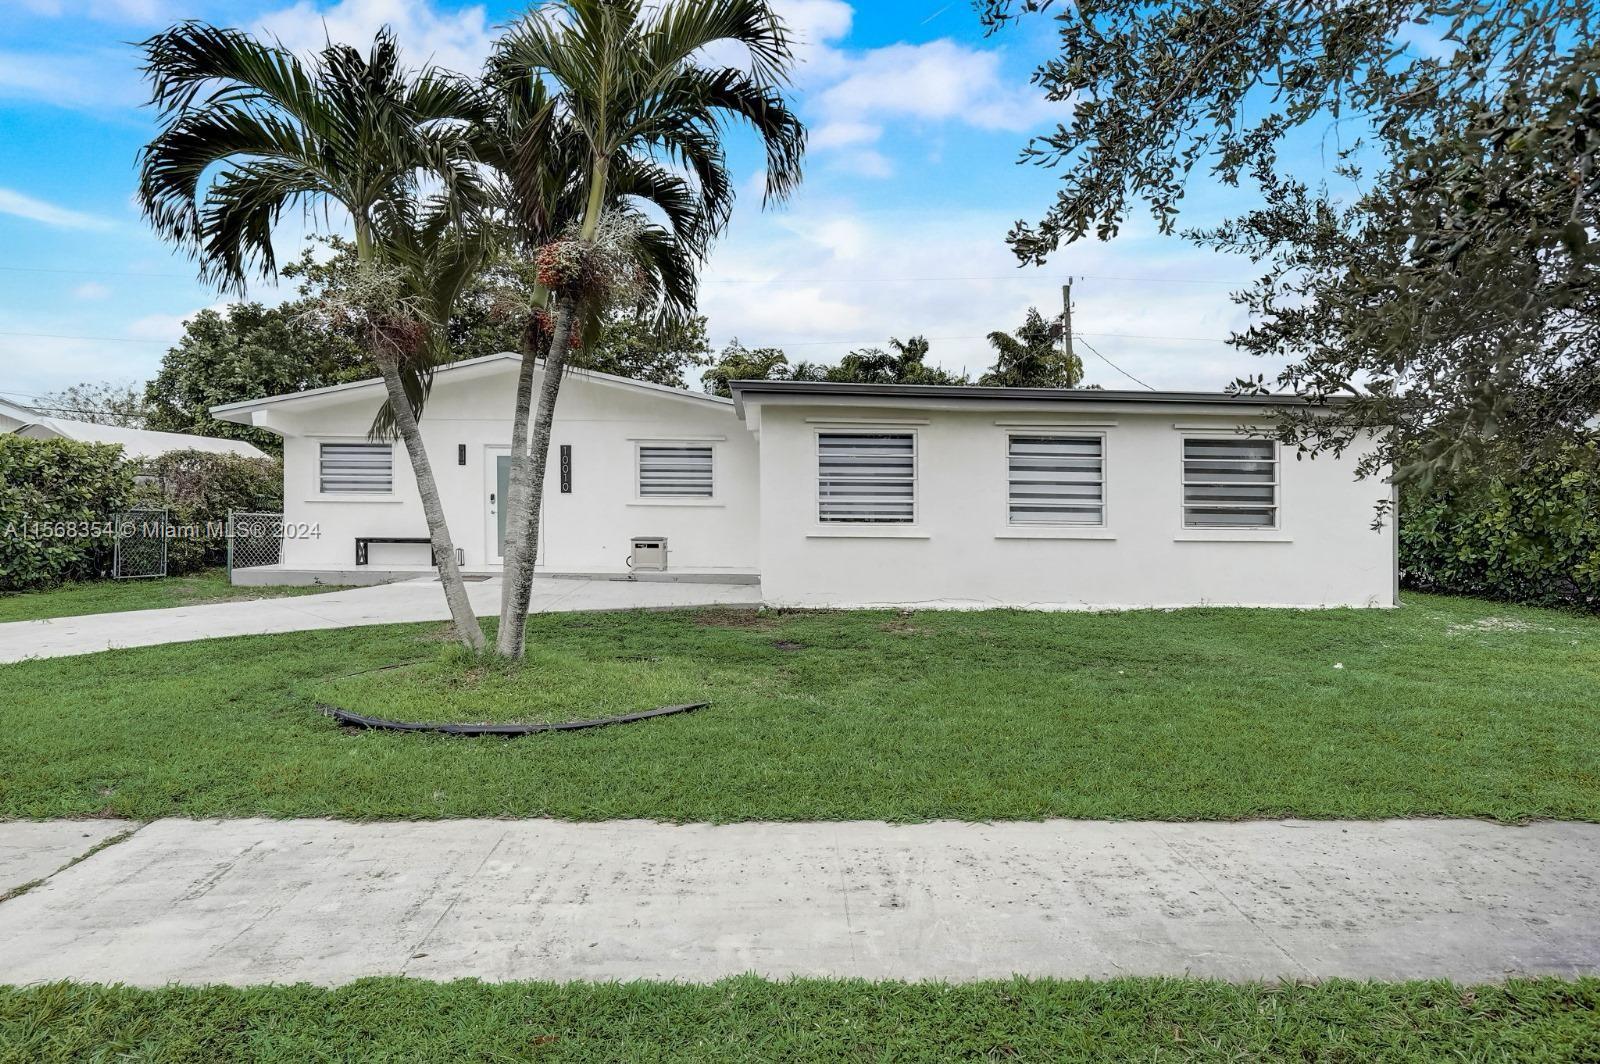 BEUTIFUL,BEUTIFUL,LOCATION SELLER MOTIVATED , RV Included  Property completely remodeled in one the most spectacular areas of Cutler Bay close to the Turnpike and Southland Mall , Beautiful pool and terrace and two storage room and Laundry room SELLER MOTIVATED